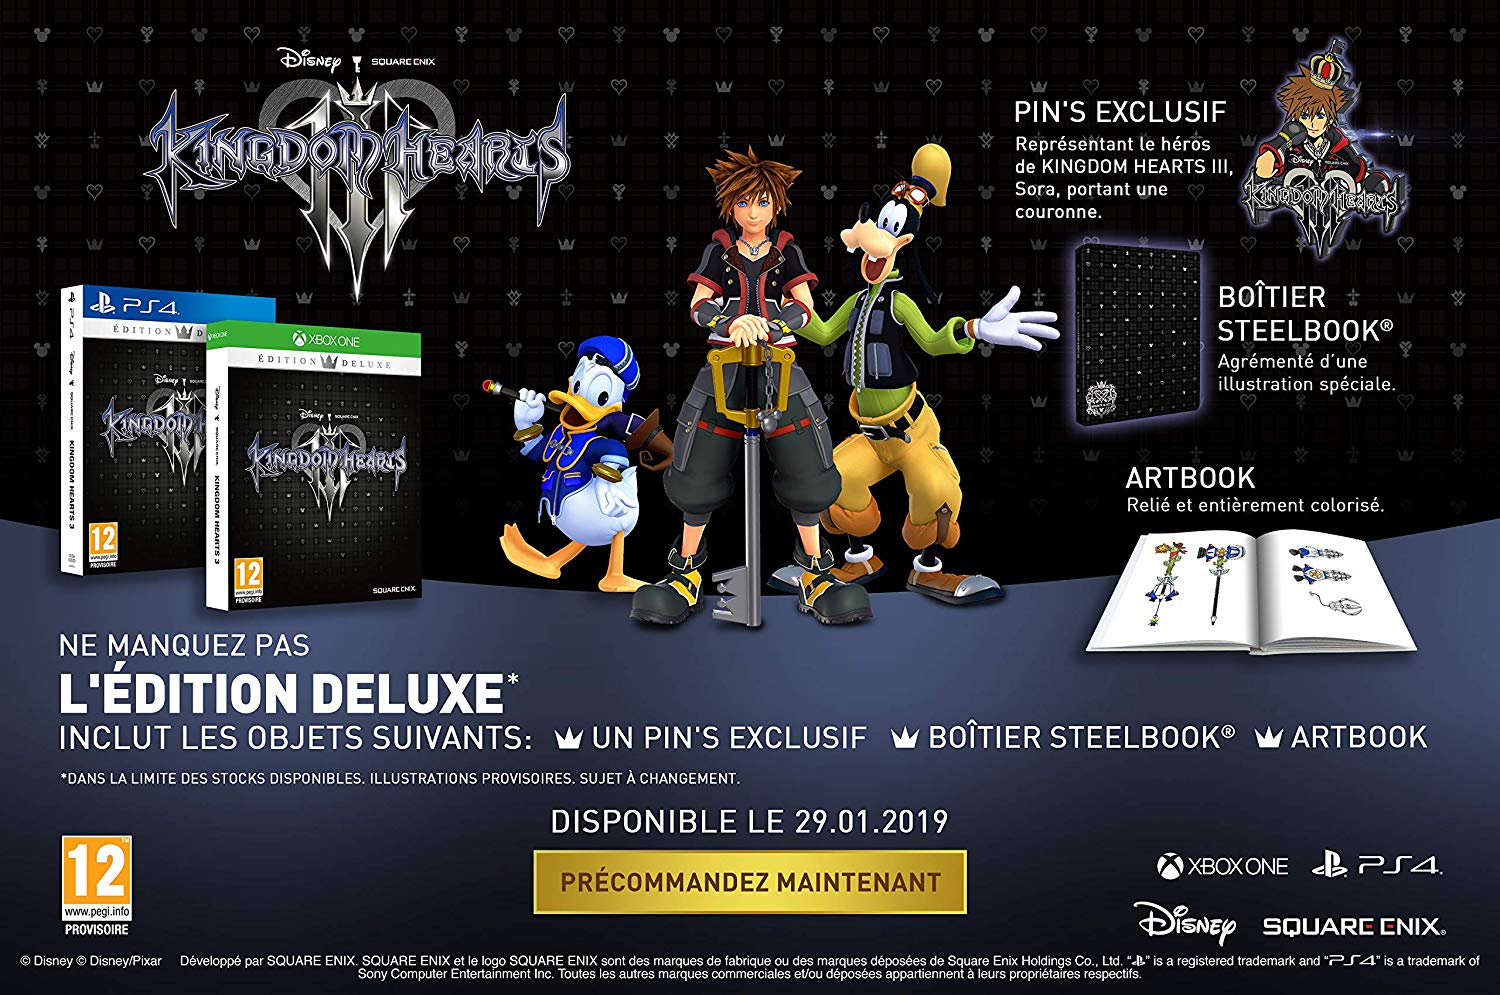 kingdom hearts 3 deluxe edition comes with codes?